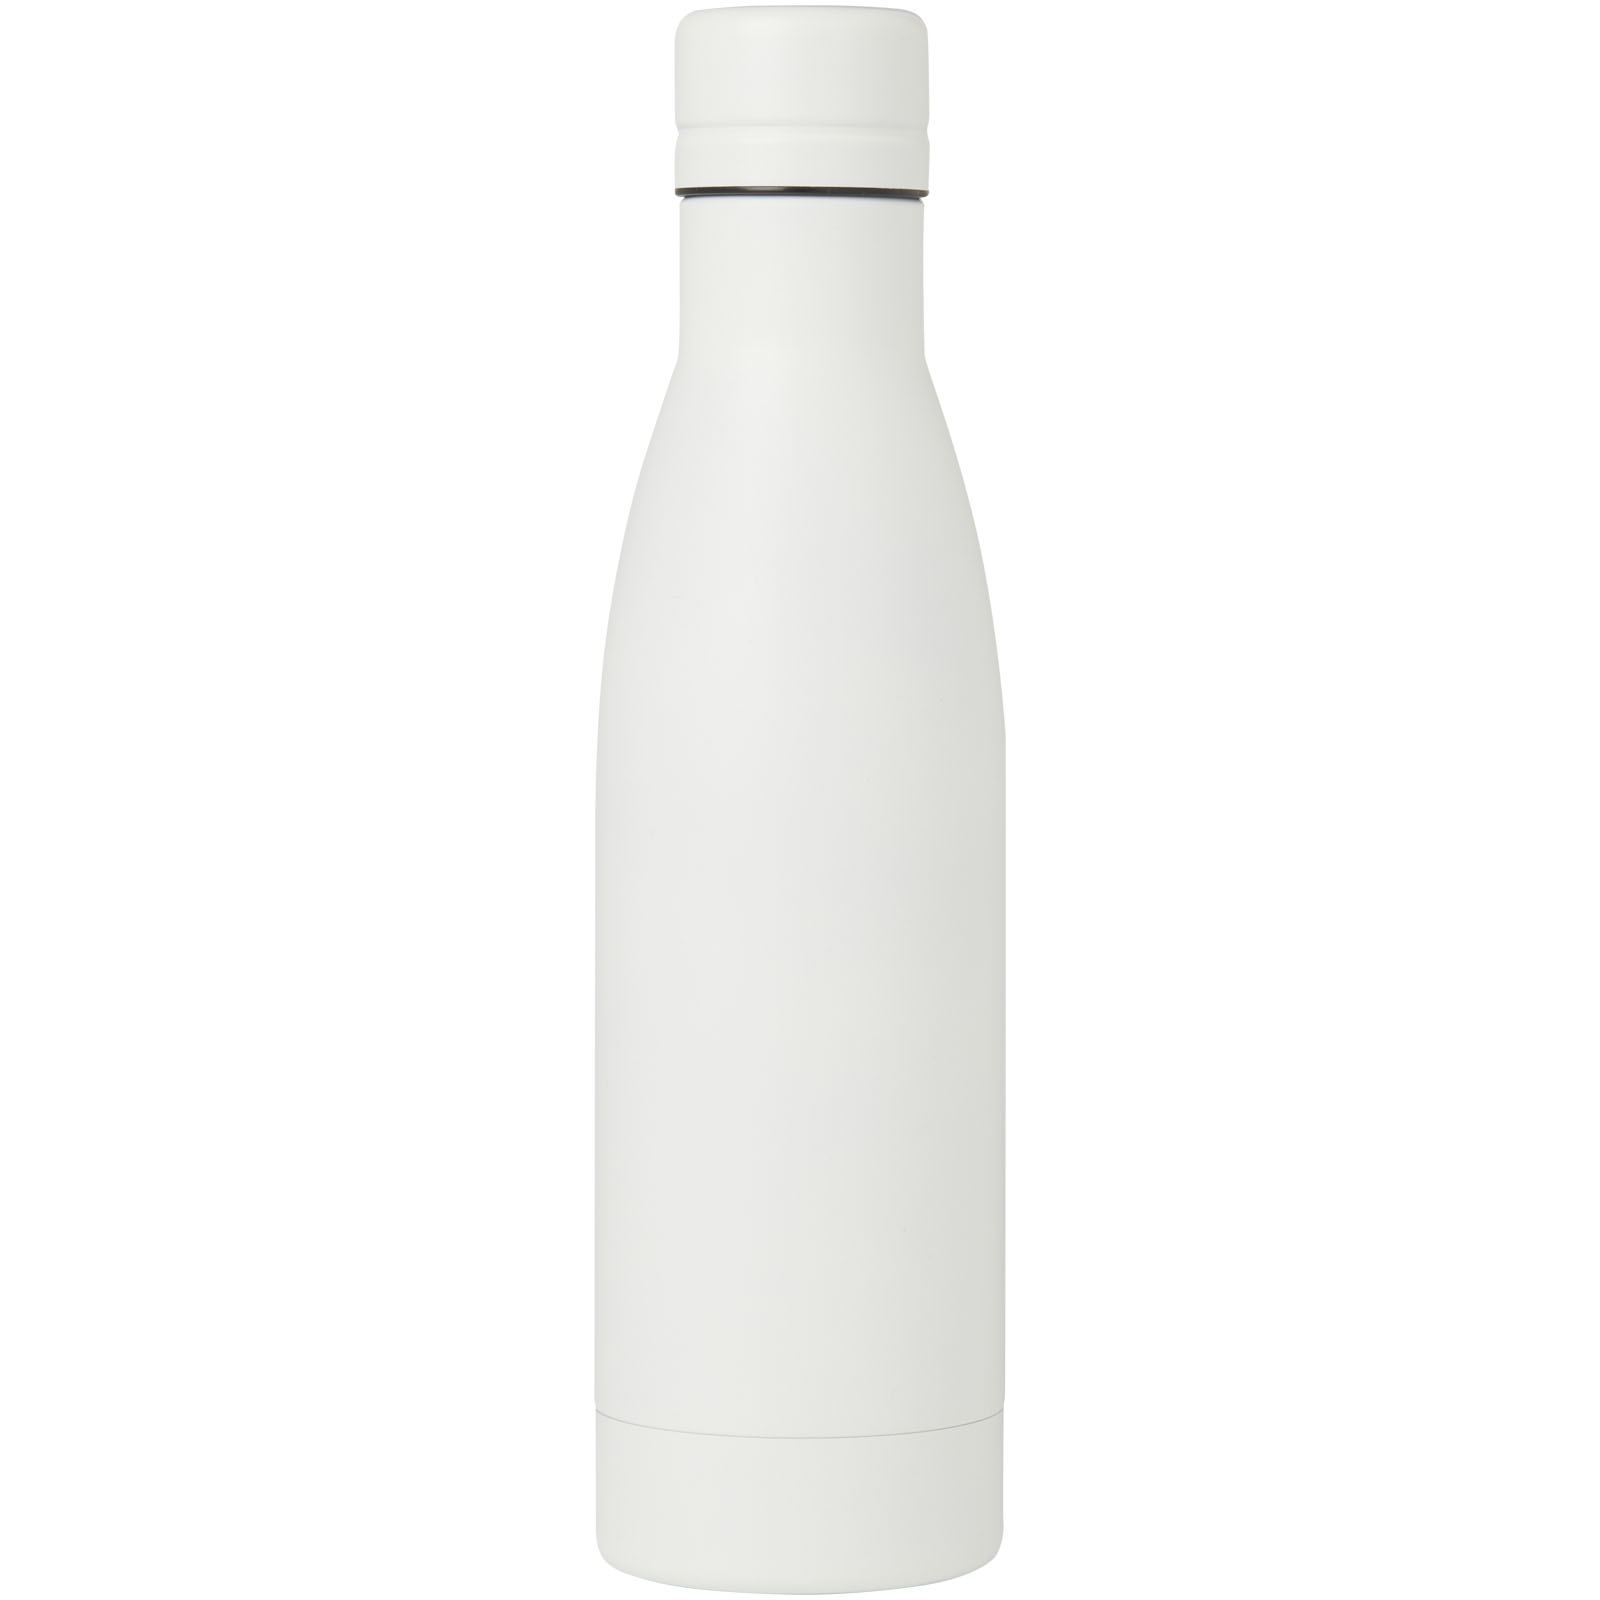 Advertising Insulated bottles - Vasa 500 ml RCS certified recycled stainless steel copper vacuum insulated bottle - 2